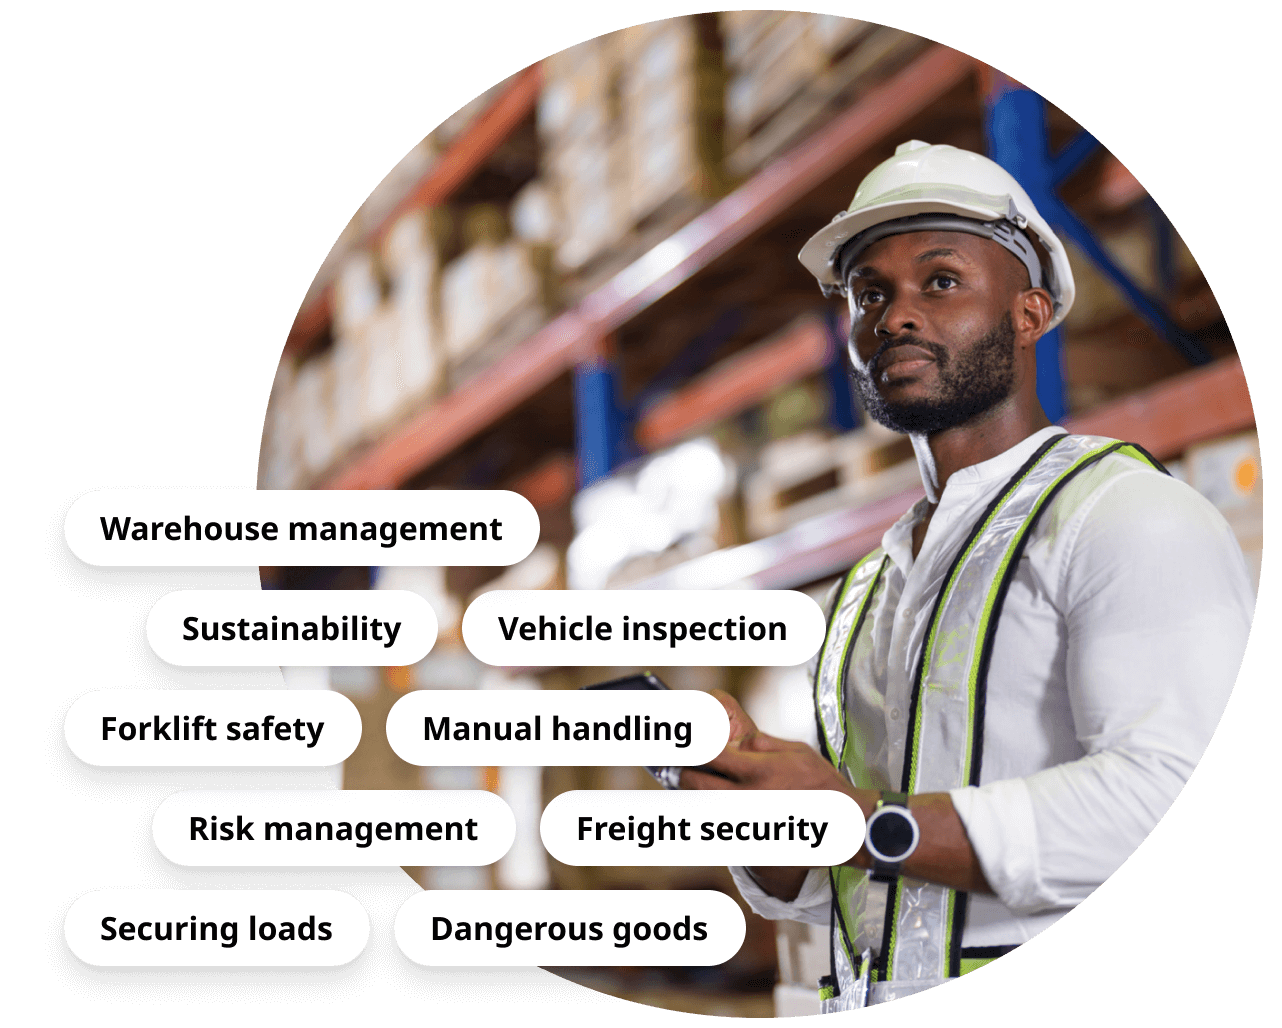 Vehicle inspection; Dangerous goods; Manual handling; Securing loads; Forklift safety
Freight security; Risk management; Warehouse management; Sustainability